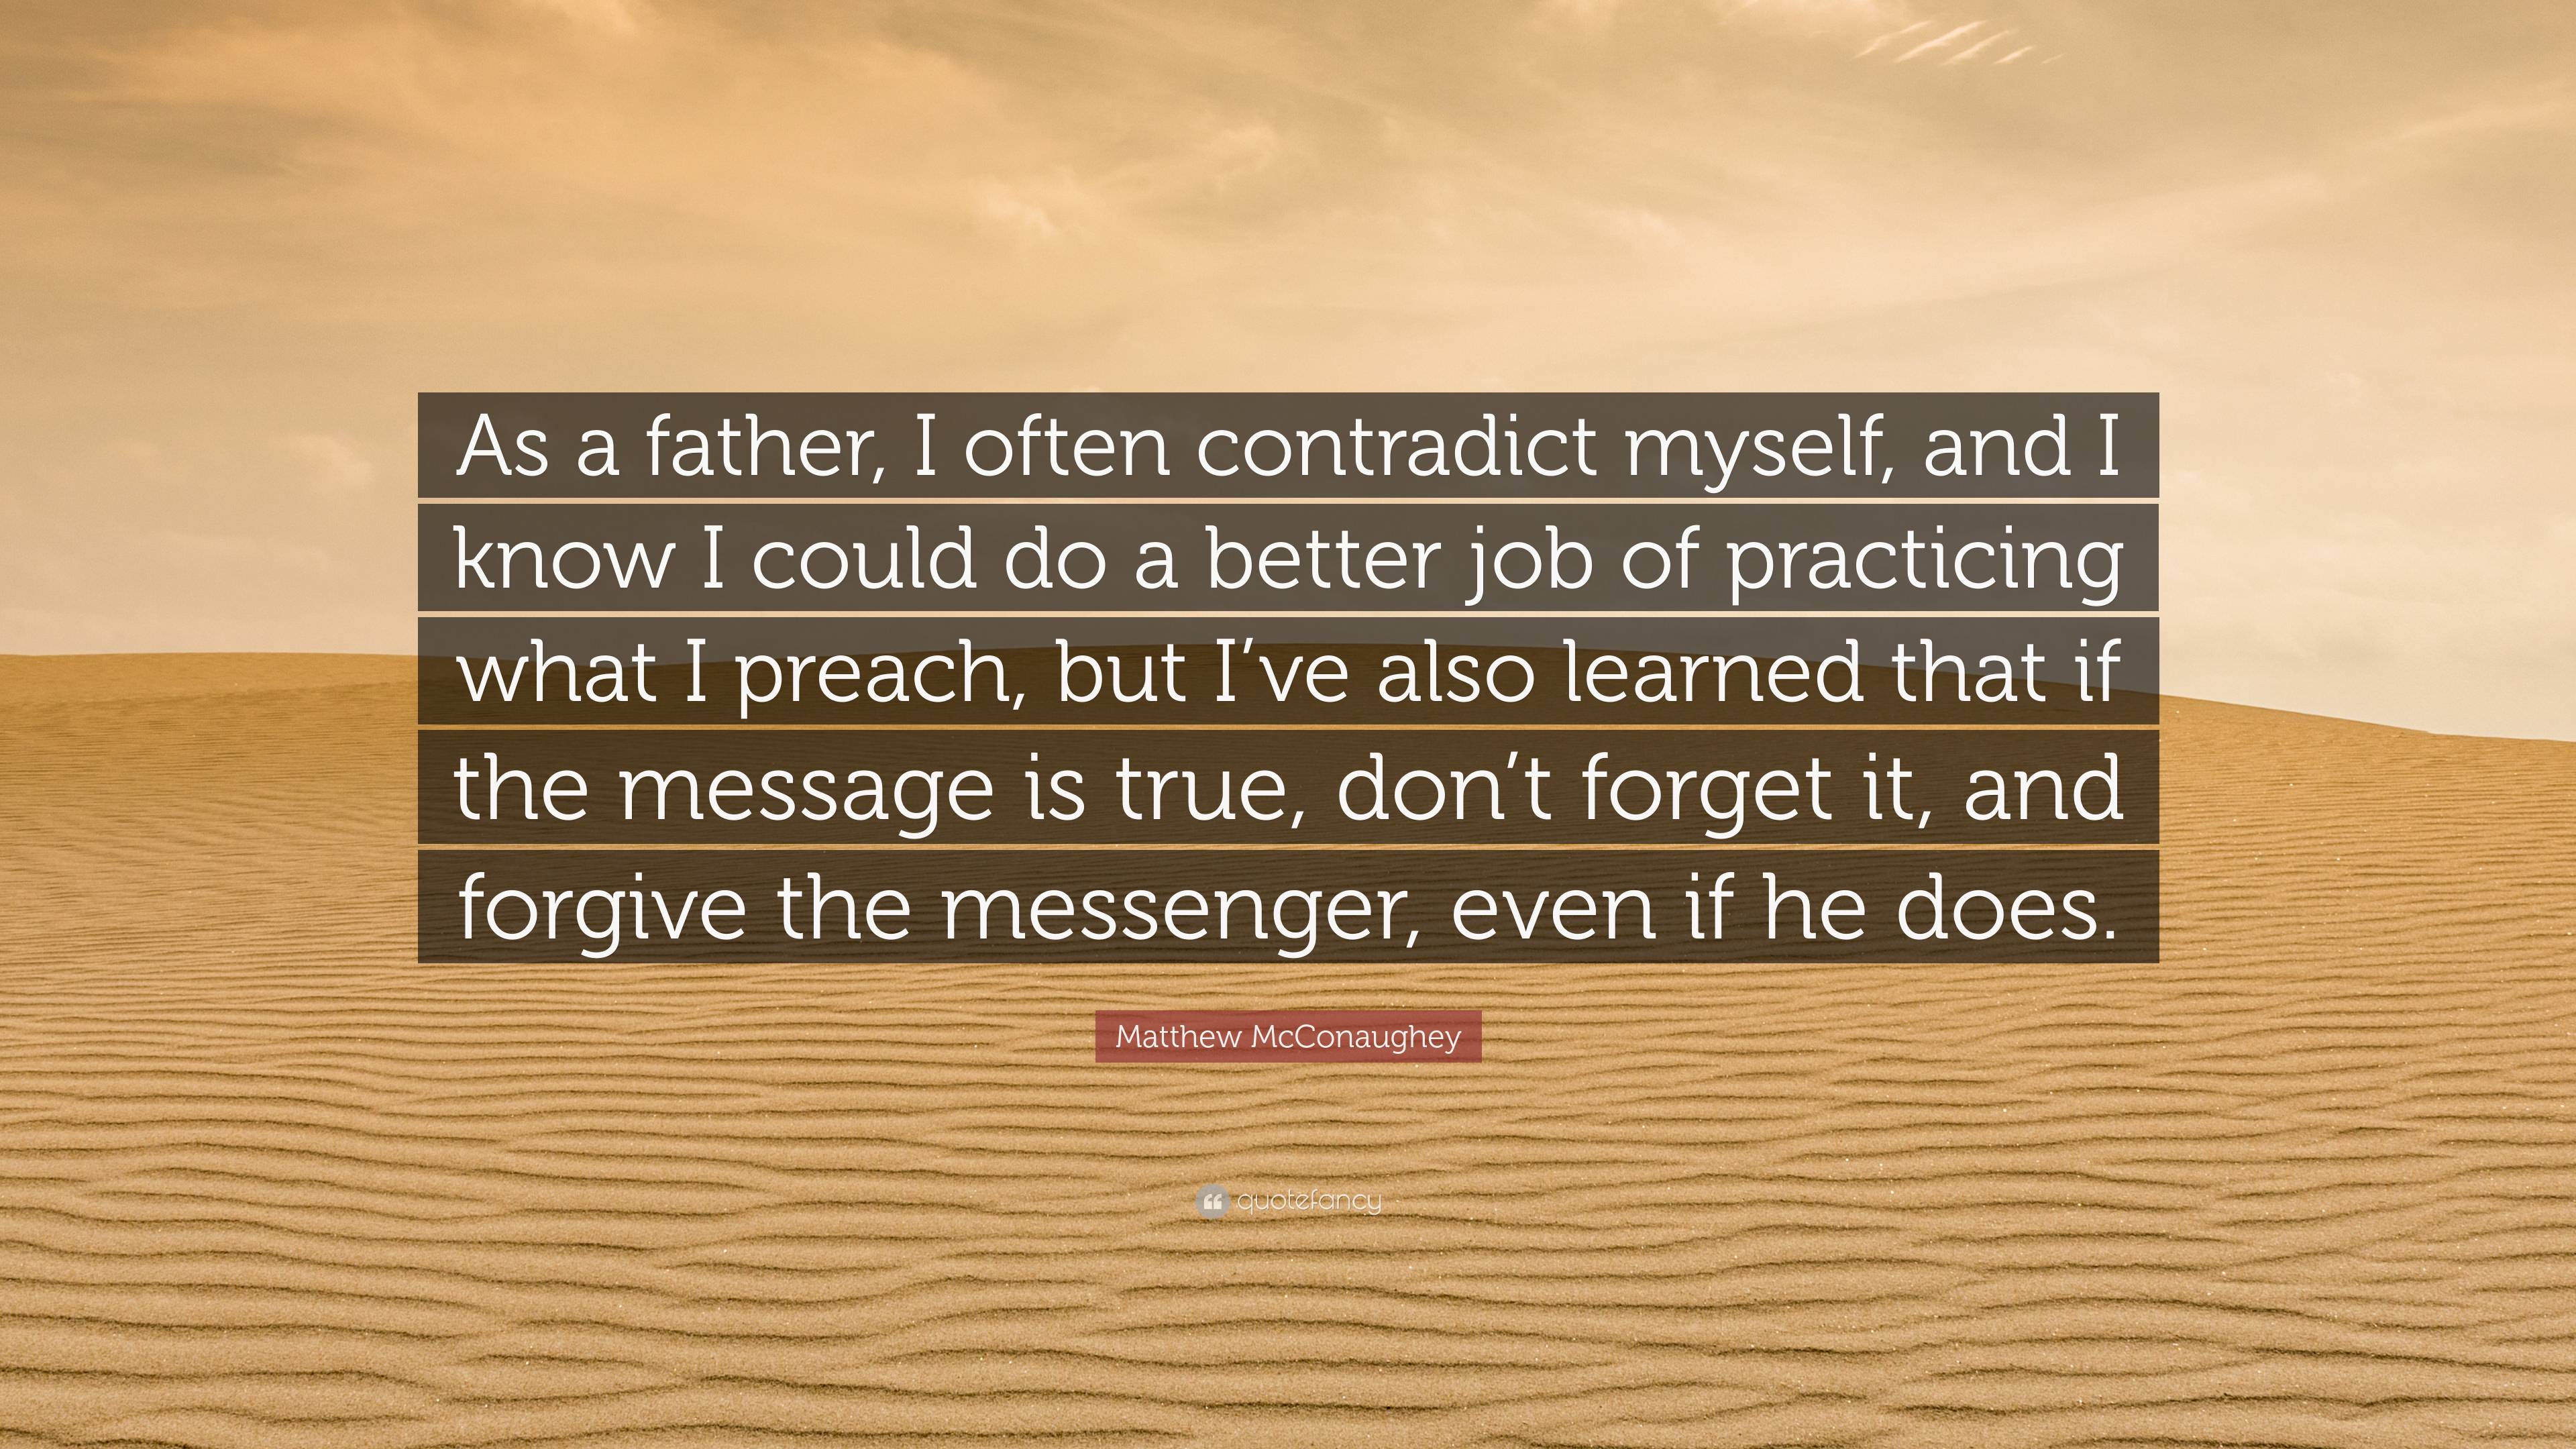 Matthew McConaughey Quote: “As a father, I often contradict myself, and ...